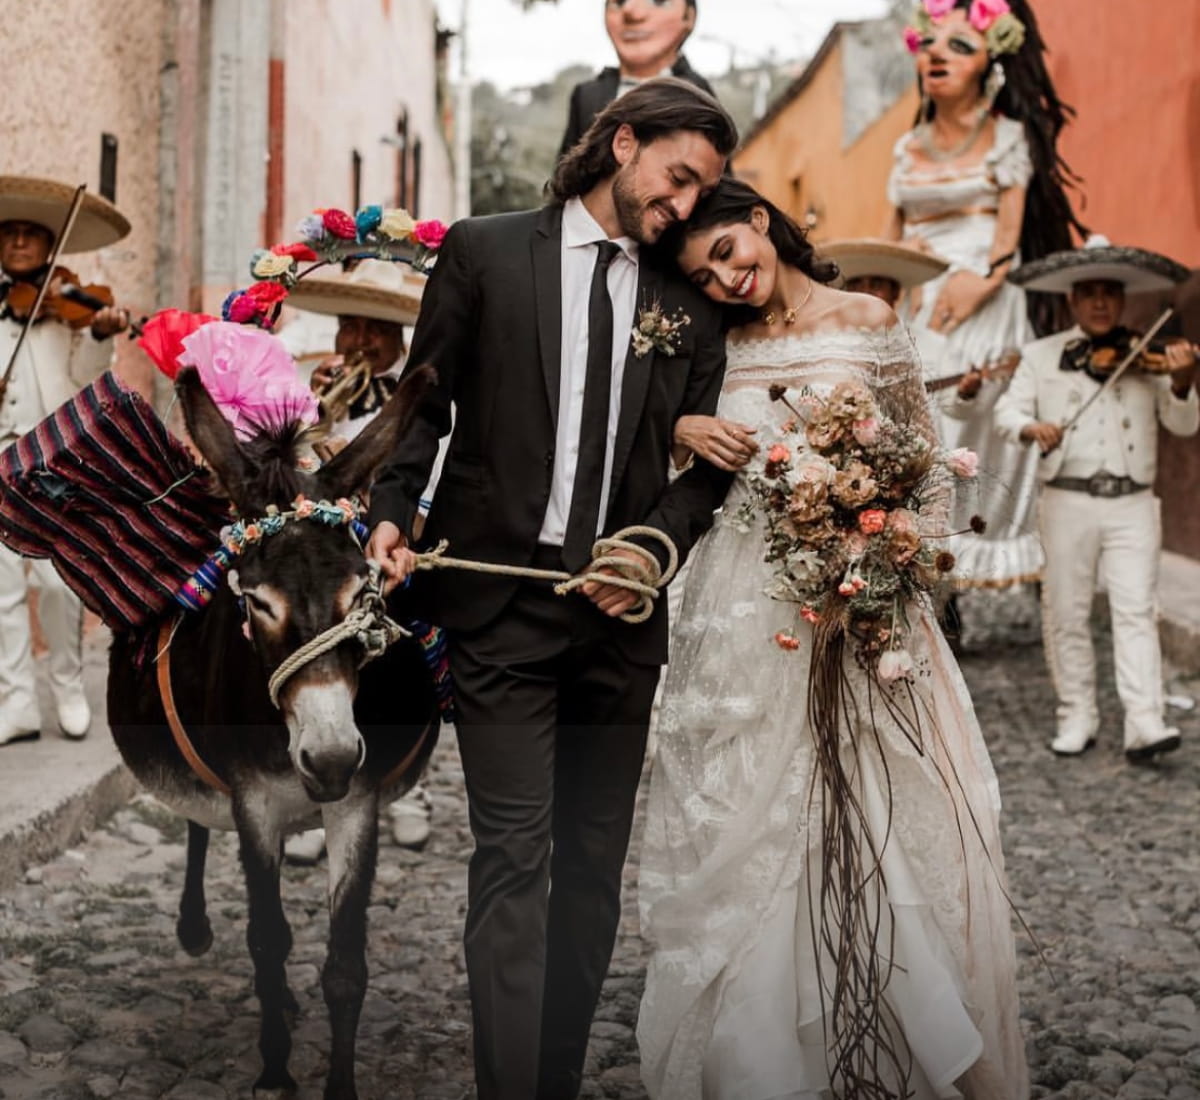 Wedding traditions from around the world